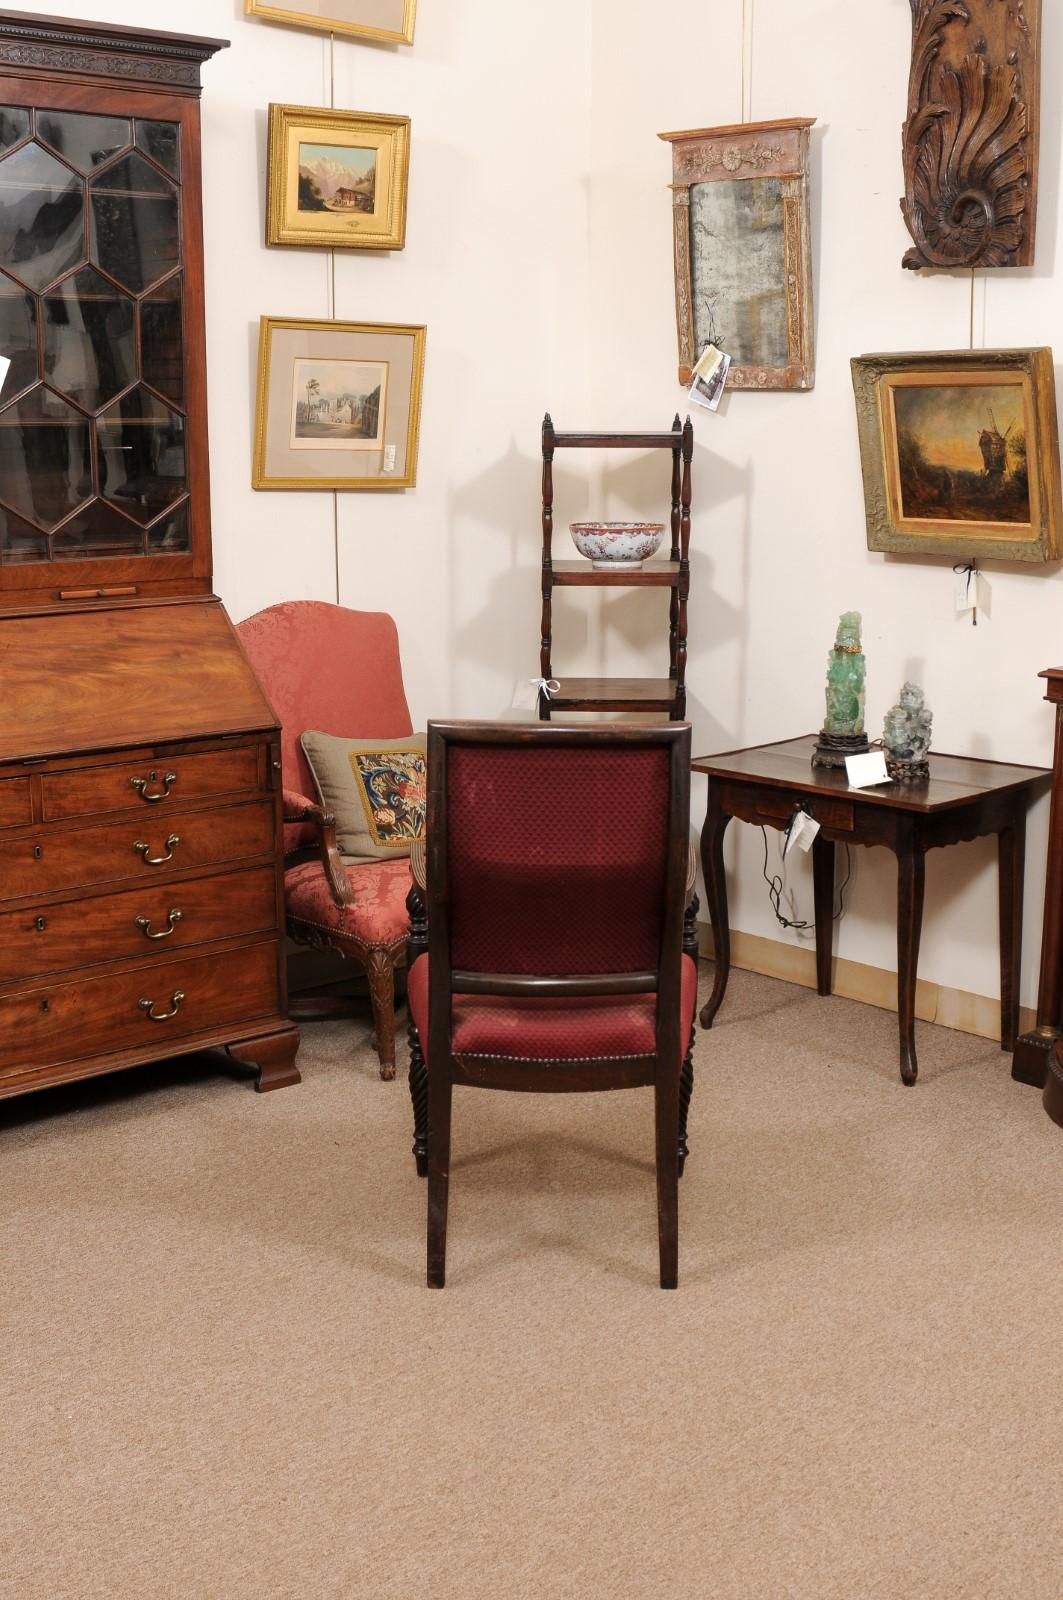 Large 19th Century English Regency Mahogany Armchair with Twisted Turned Legs and Reeded Detail
